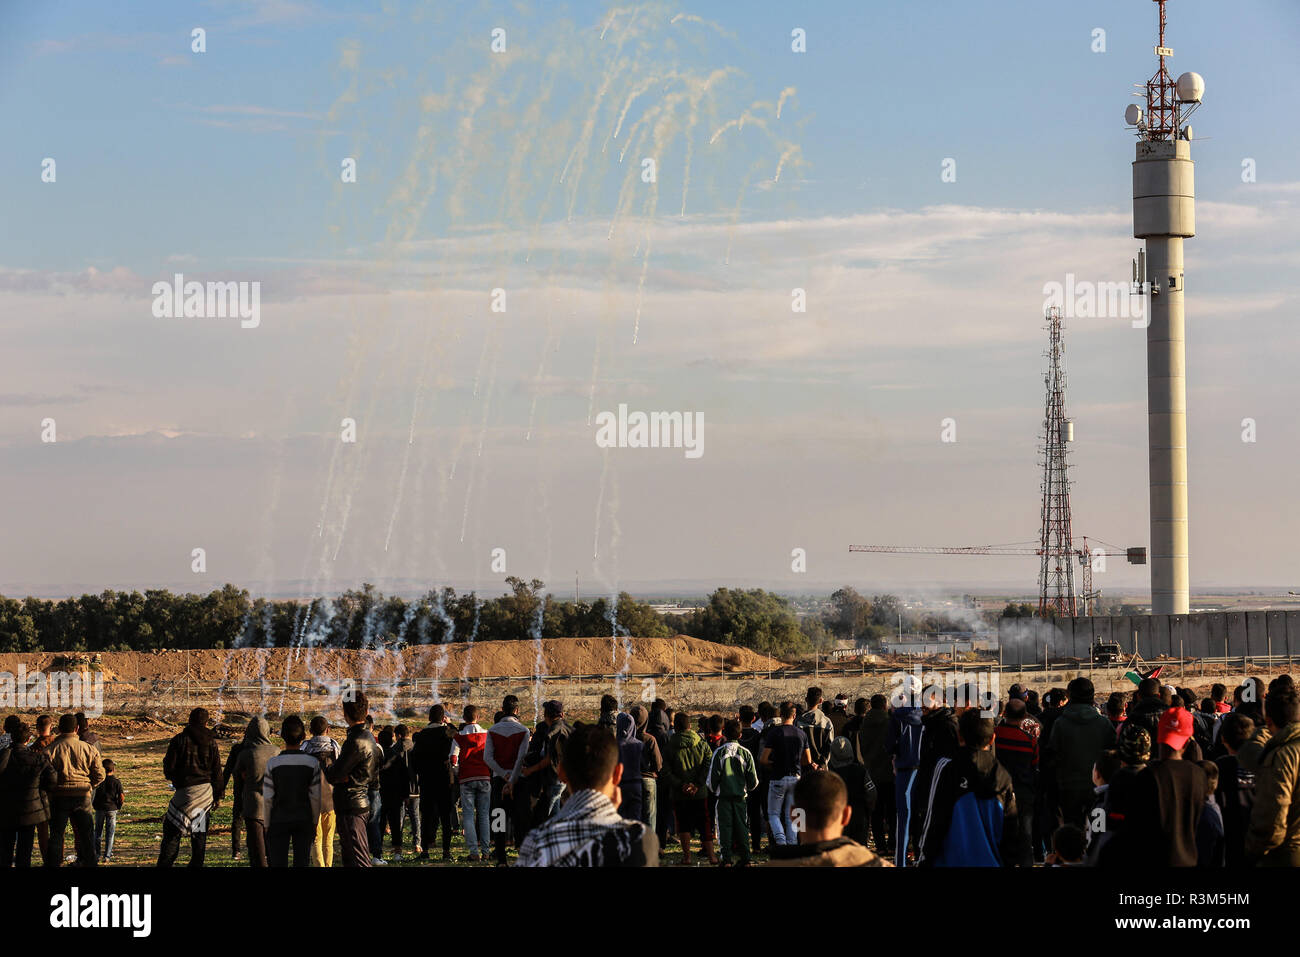 Gaza, Palestinian Territories - 23rd November, 2018. Palestinians are participating in the "Great Return March" near the Israeli-Gaza border, east of Rafah, in the southern Gaza Strip, on November 23, 2018.  © Abed Rahim Khatib / Awakening / Alamy Live News Stock Photo